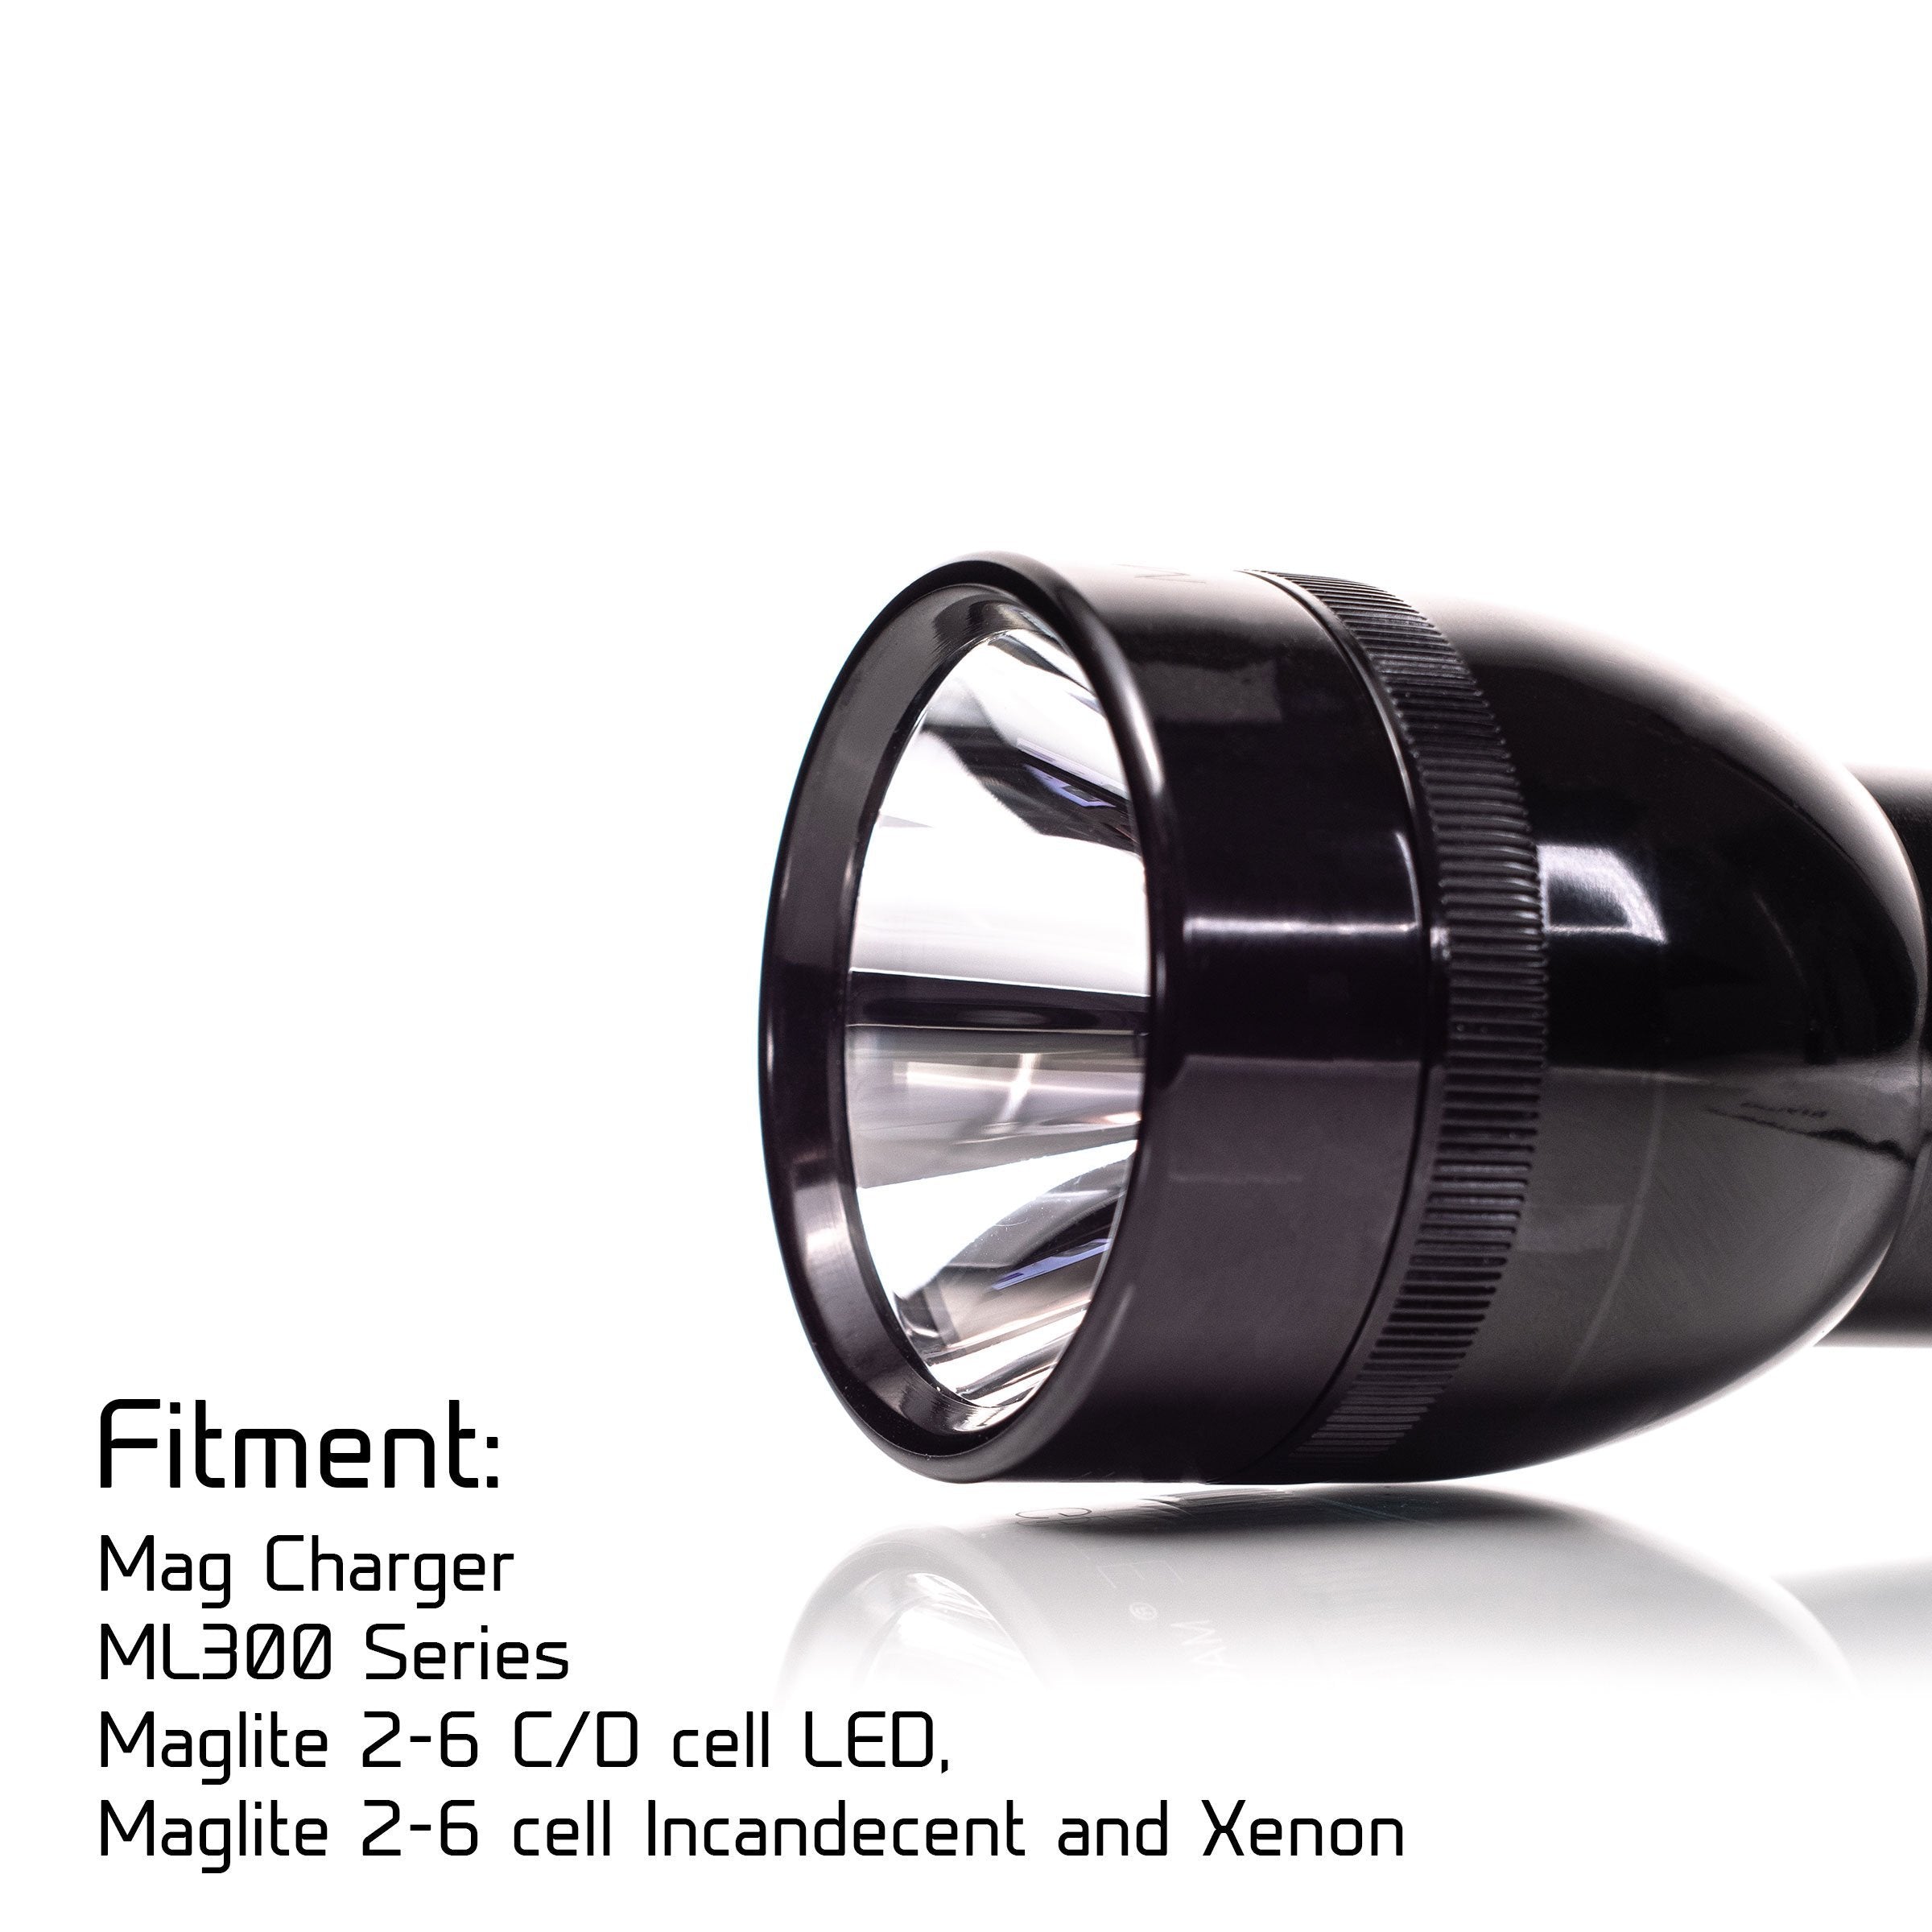 lexan poly carbonate shatter resistant replacement lens for c or d model maglite mag lite flashlights by litt industries